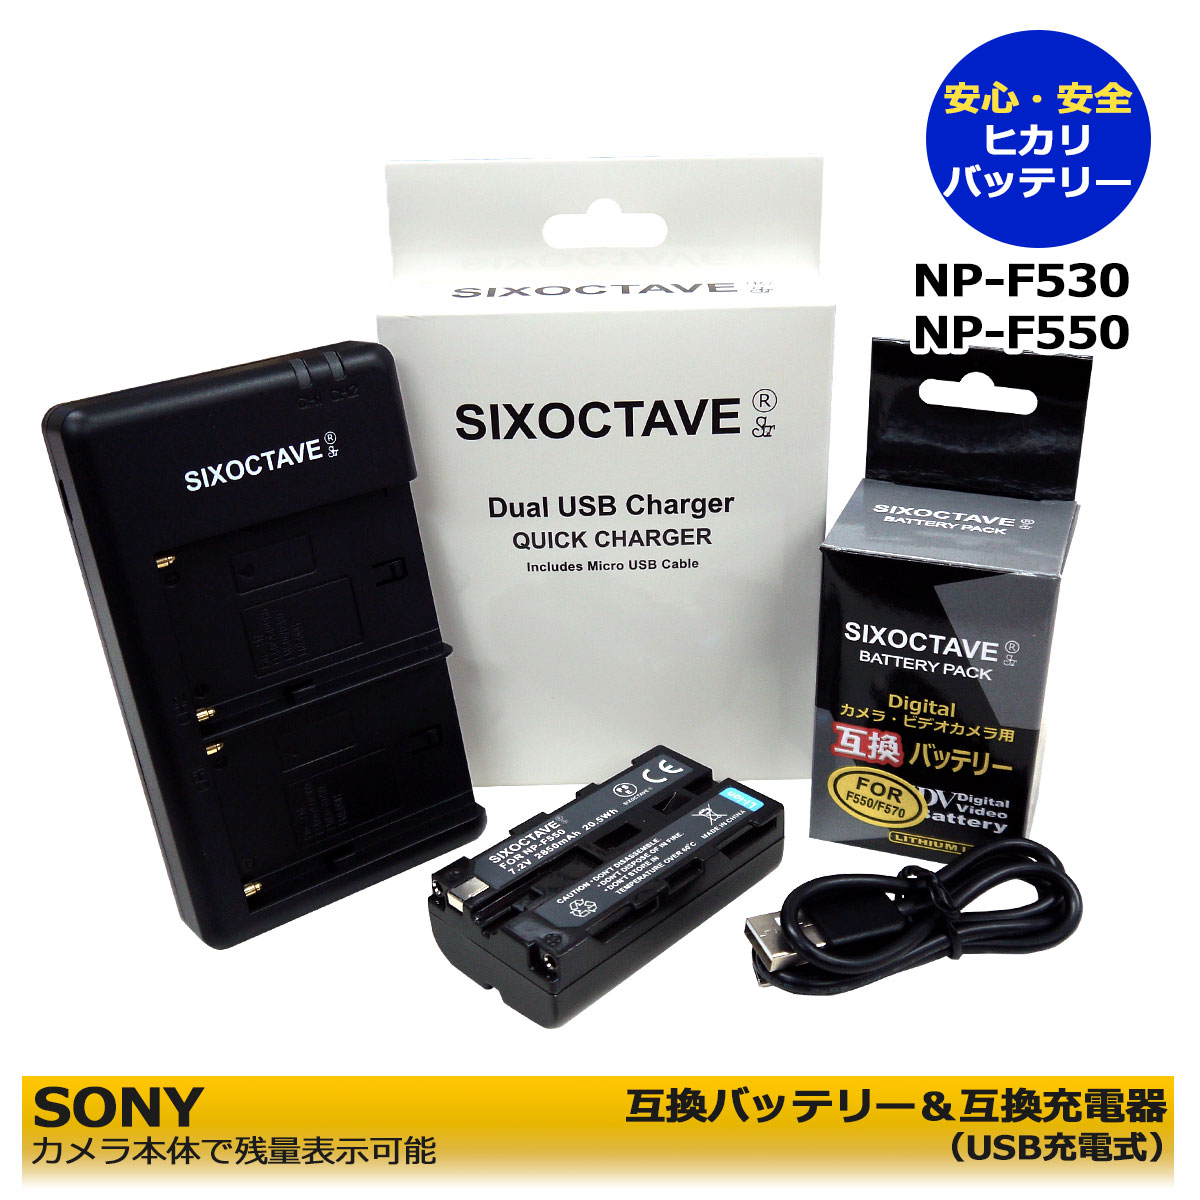 NP-F550/NP-F570　互換バッテリと SONY ソニー互換DUALチャージャーUSB式　CCD-TR713E / CCD-TR716　CCD-TR717 / CCD-TR717E / CCD-TR718 / CCD-TR718E / CCD-TR728 / CCD-TR728E / CCD-TR730E / CCD-TR76 / CCD-TR730E / CCD-TR76 / CCD-TR845E / CCD-TR87